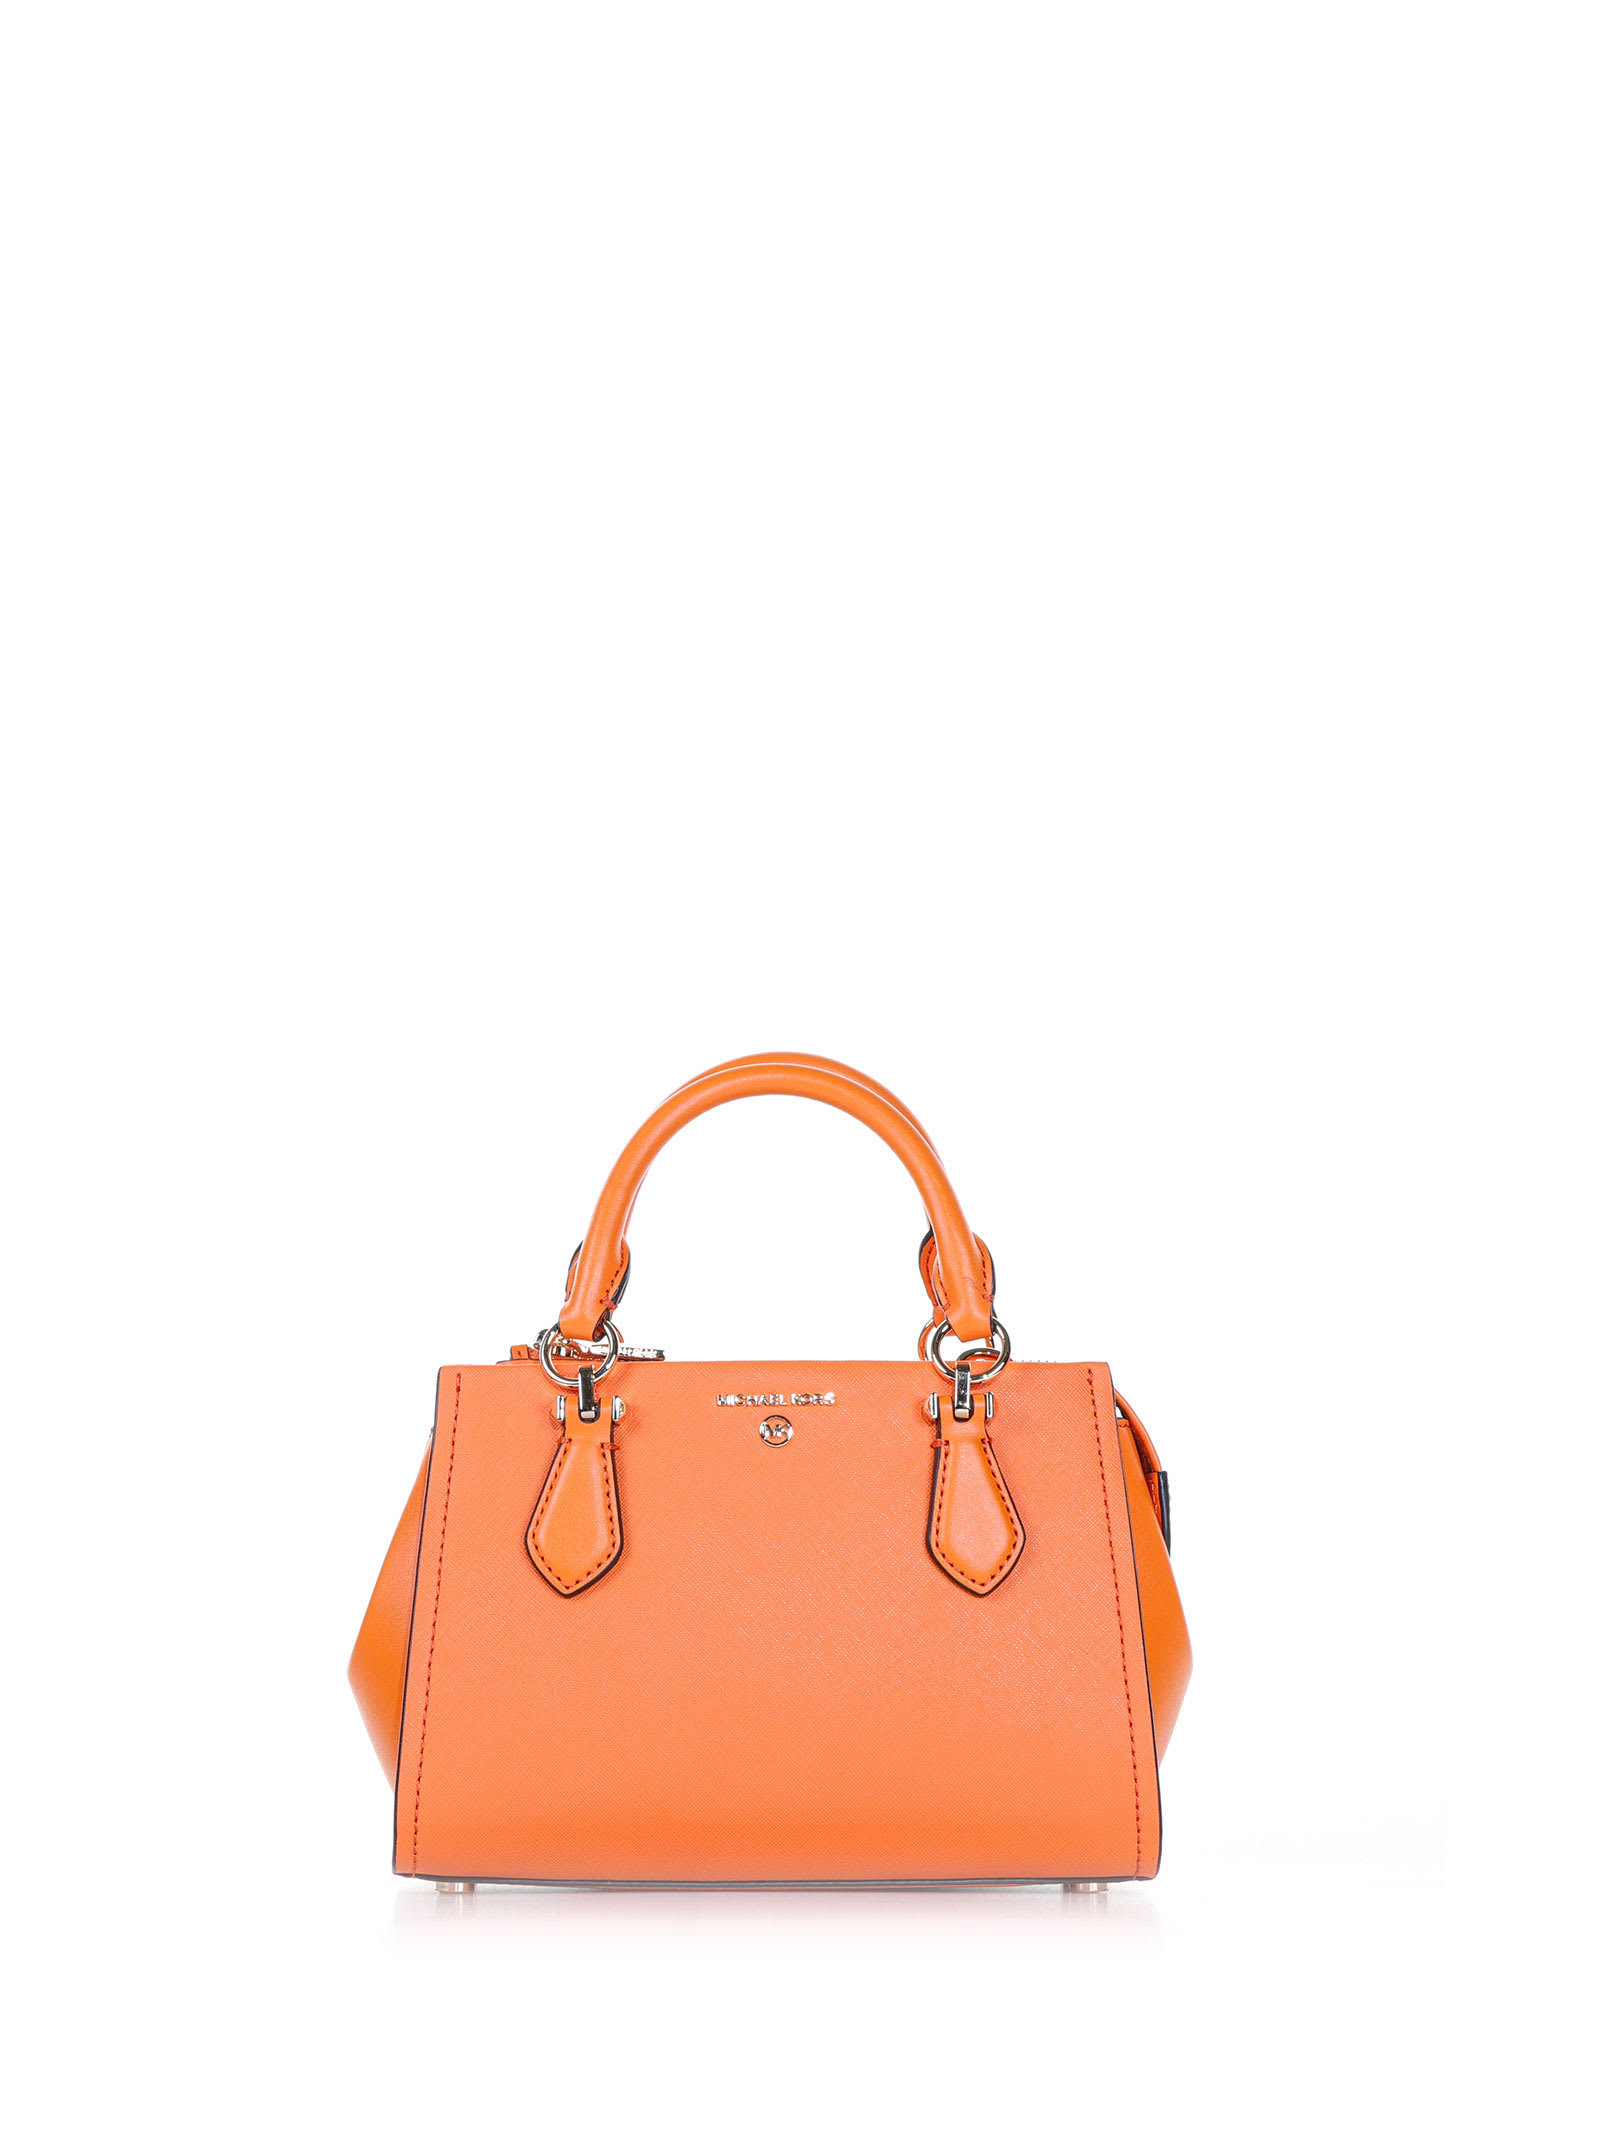 Michael Kors Marilyn women's bag in leather Apricot